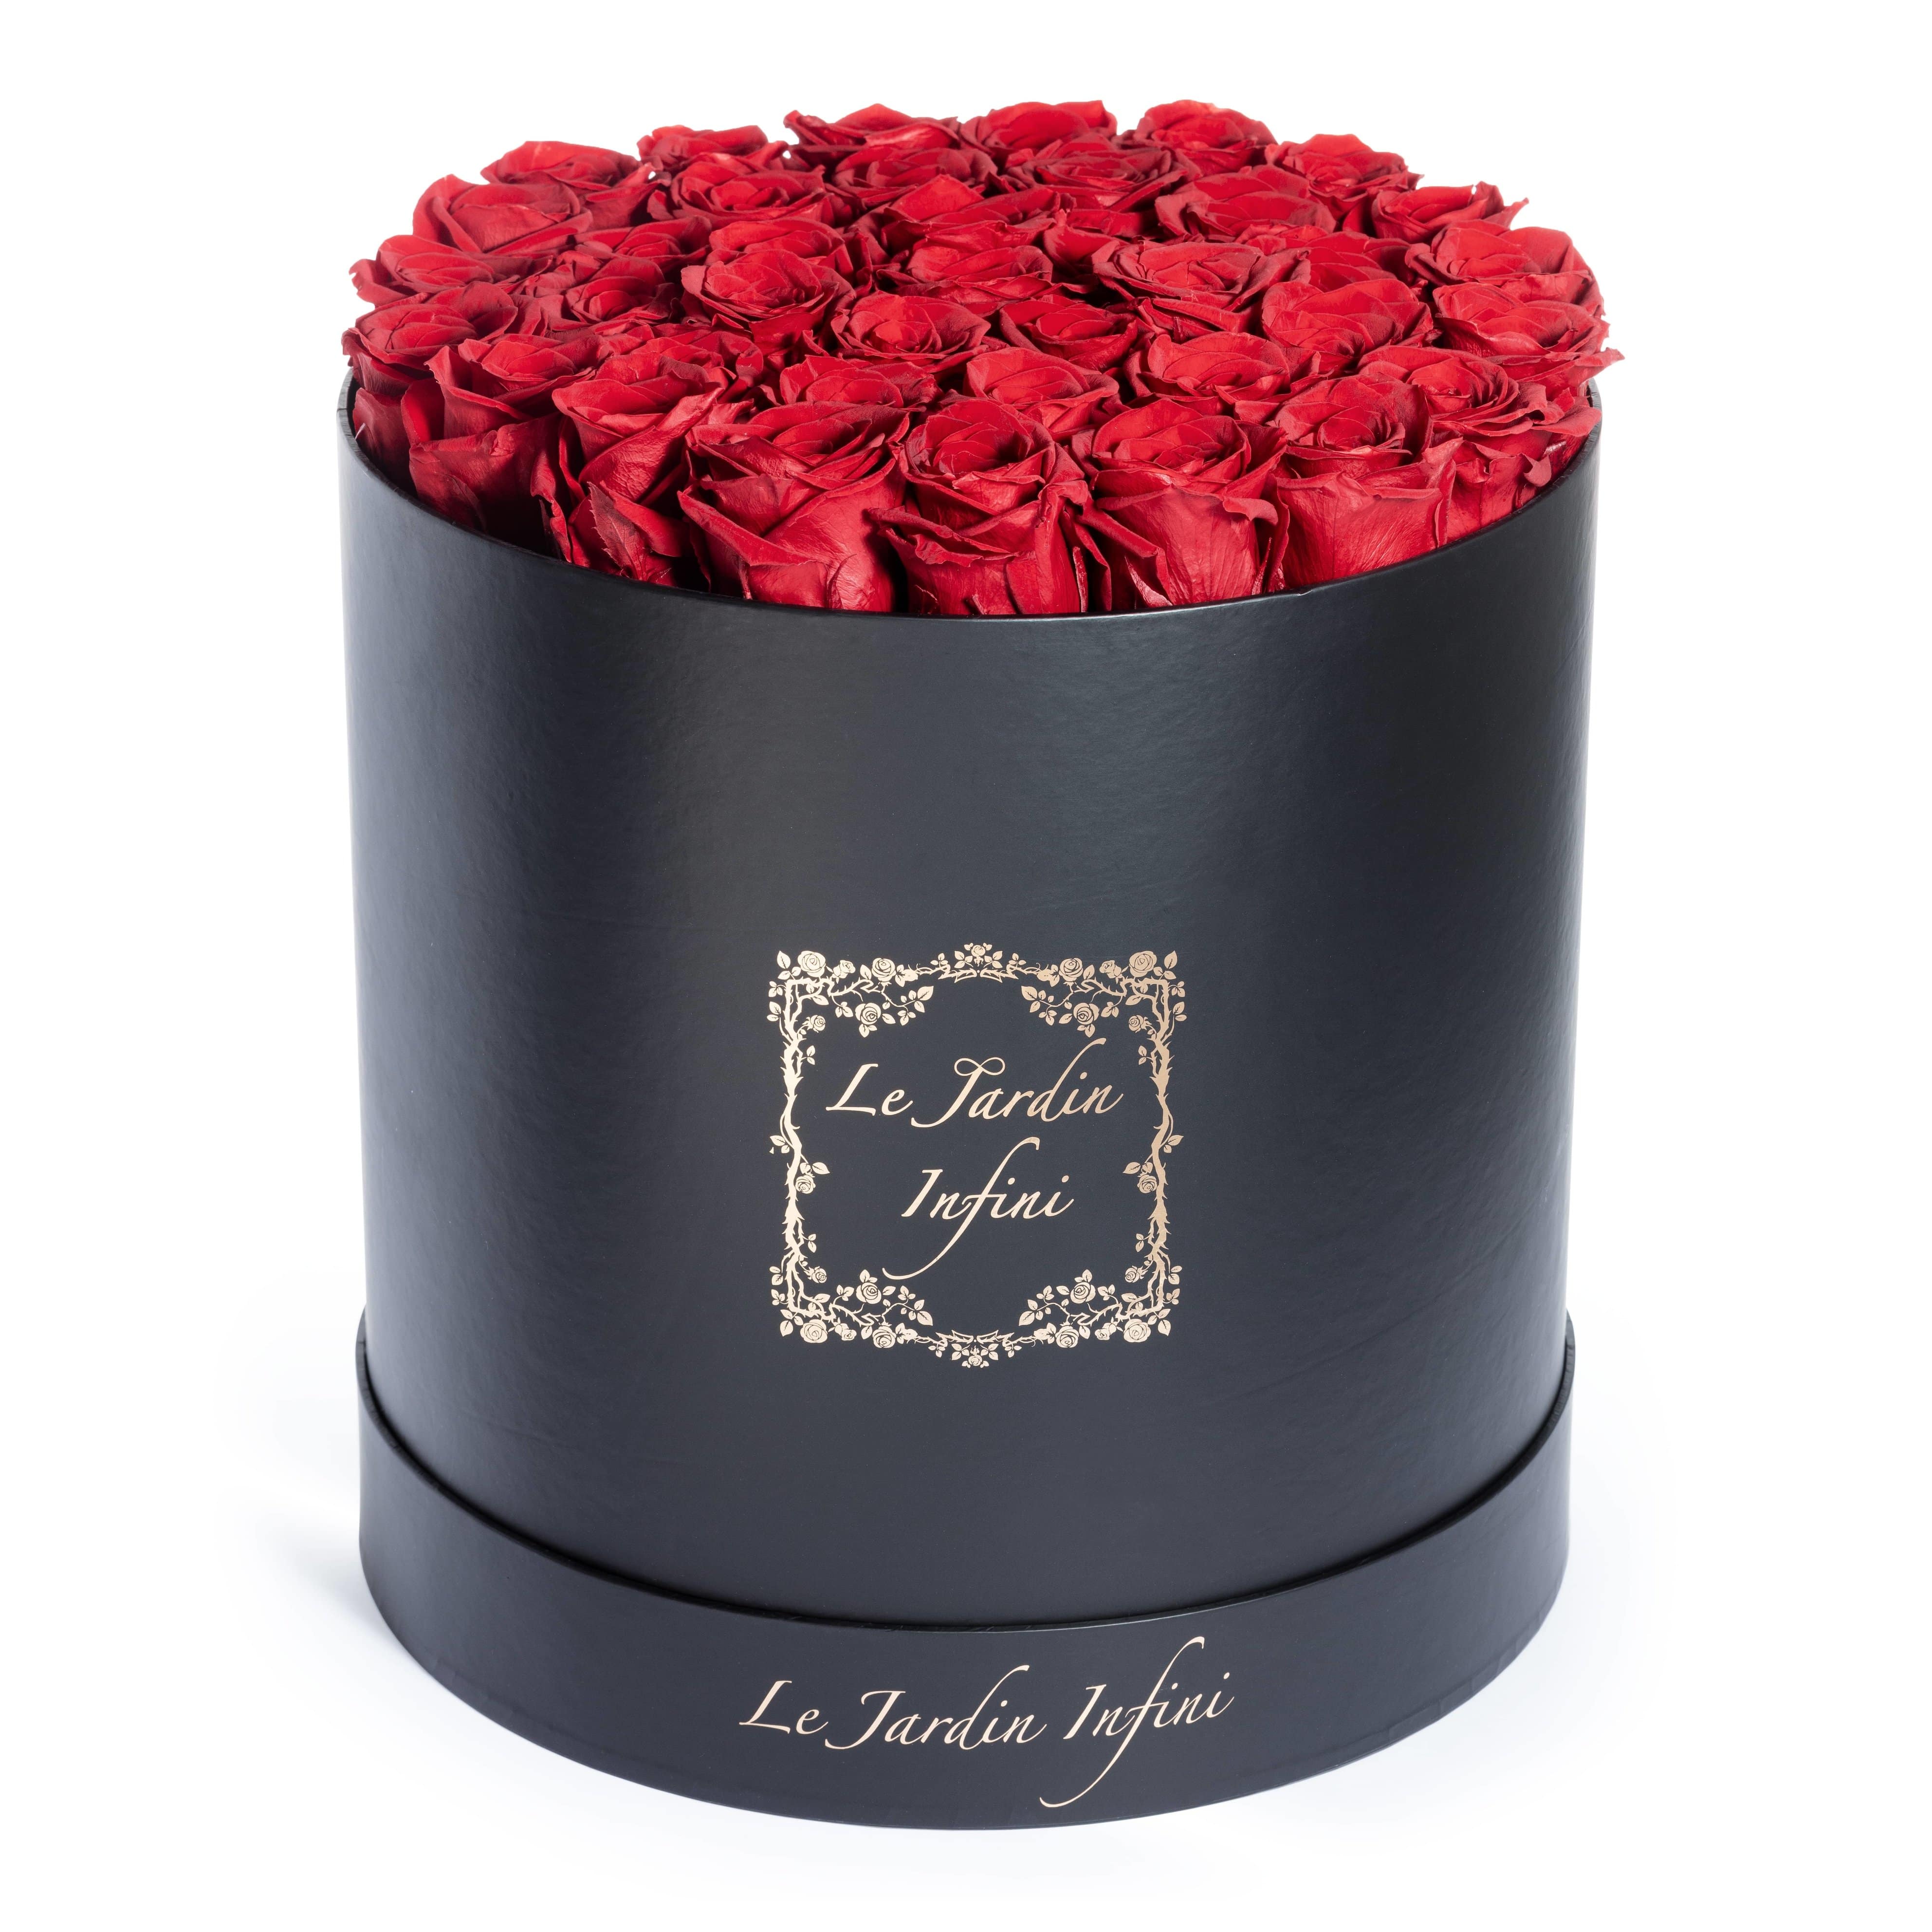 Red Preserved Roses - Large Round Black Box - Le Jardin Infini Roses in a Box